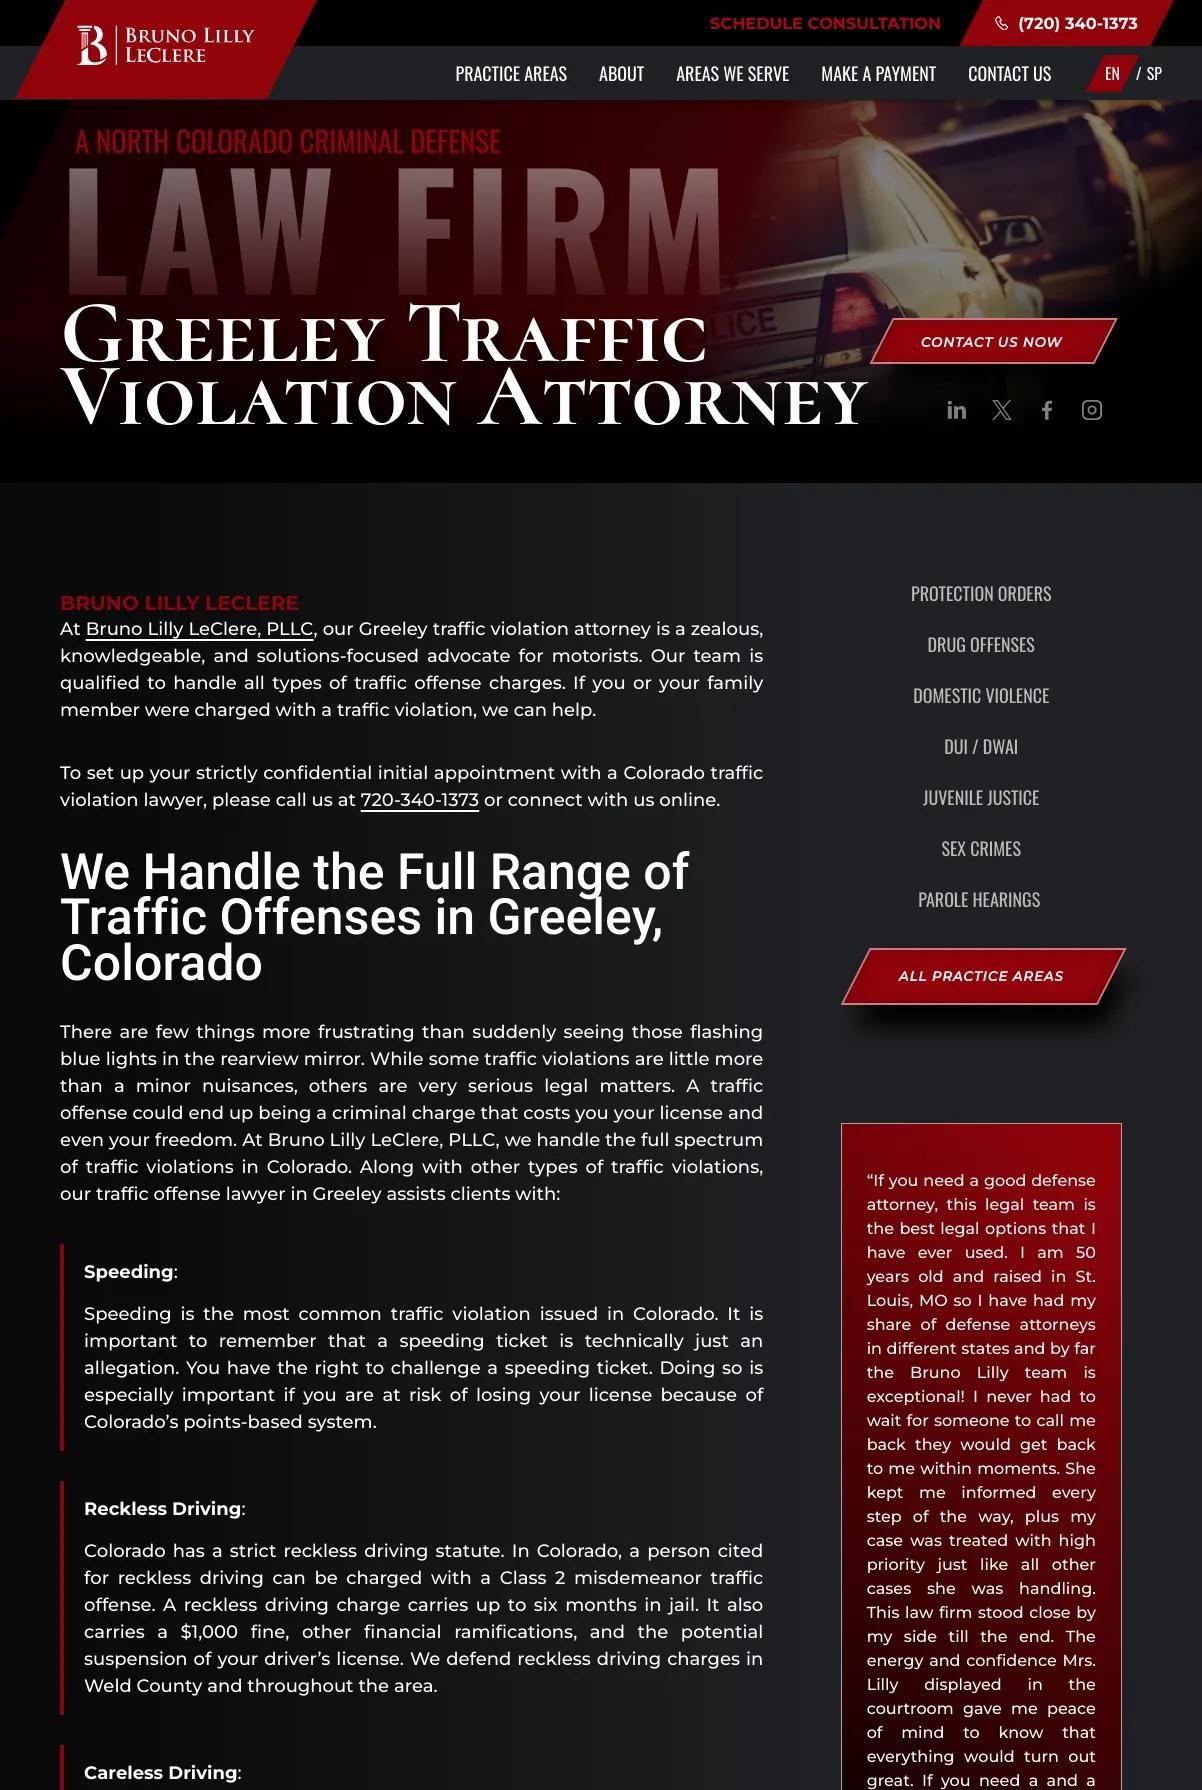 Screenshot 3 of Bruno Lilly Legal, PLLC (Example Squarespace Law Firm Website)